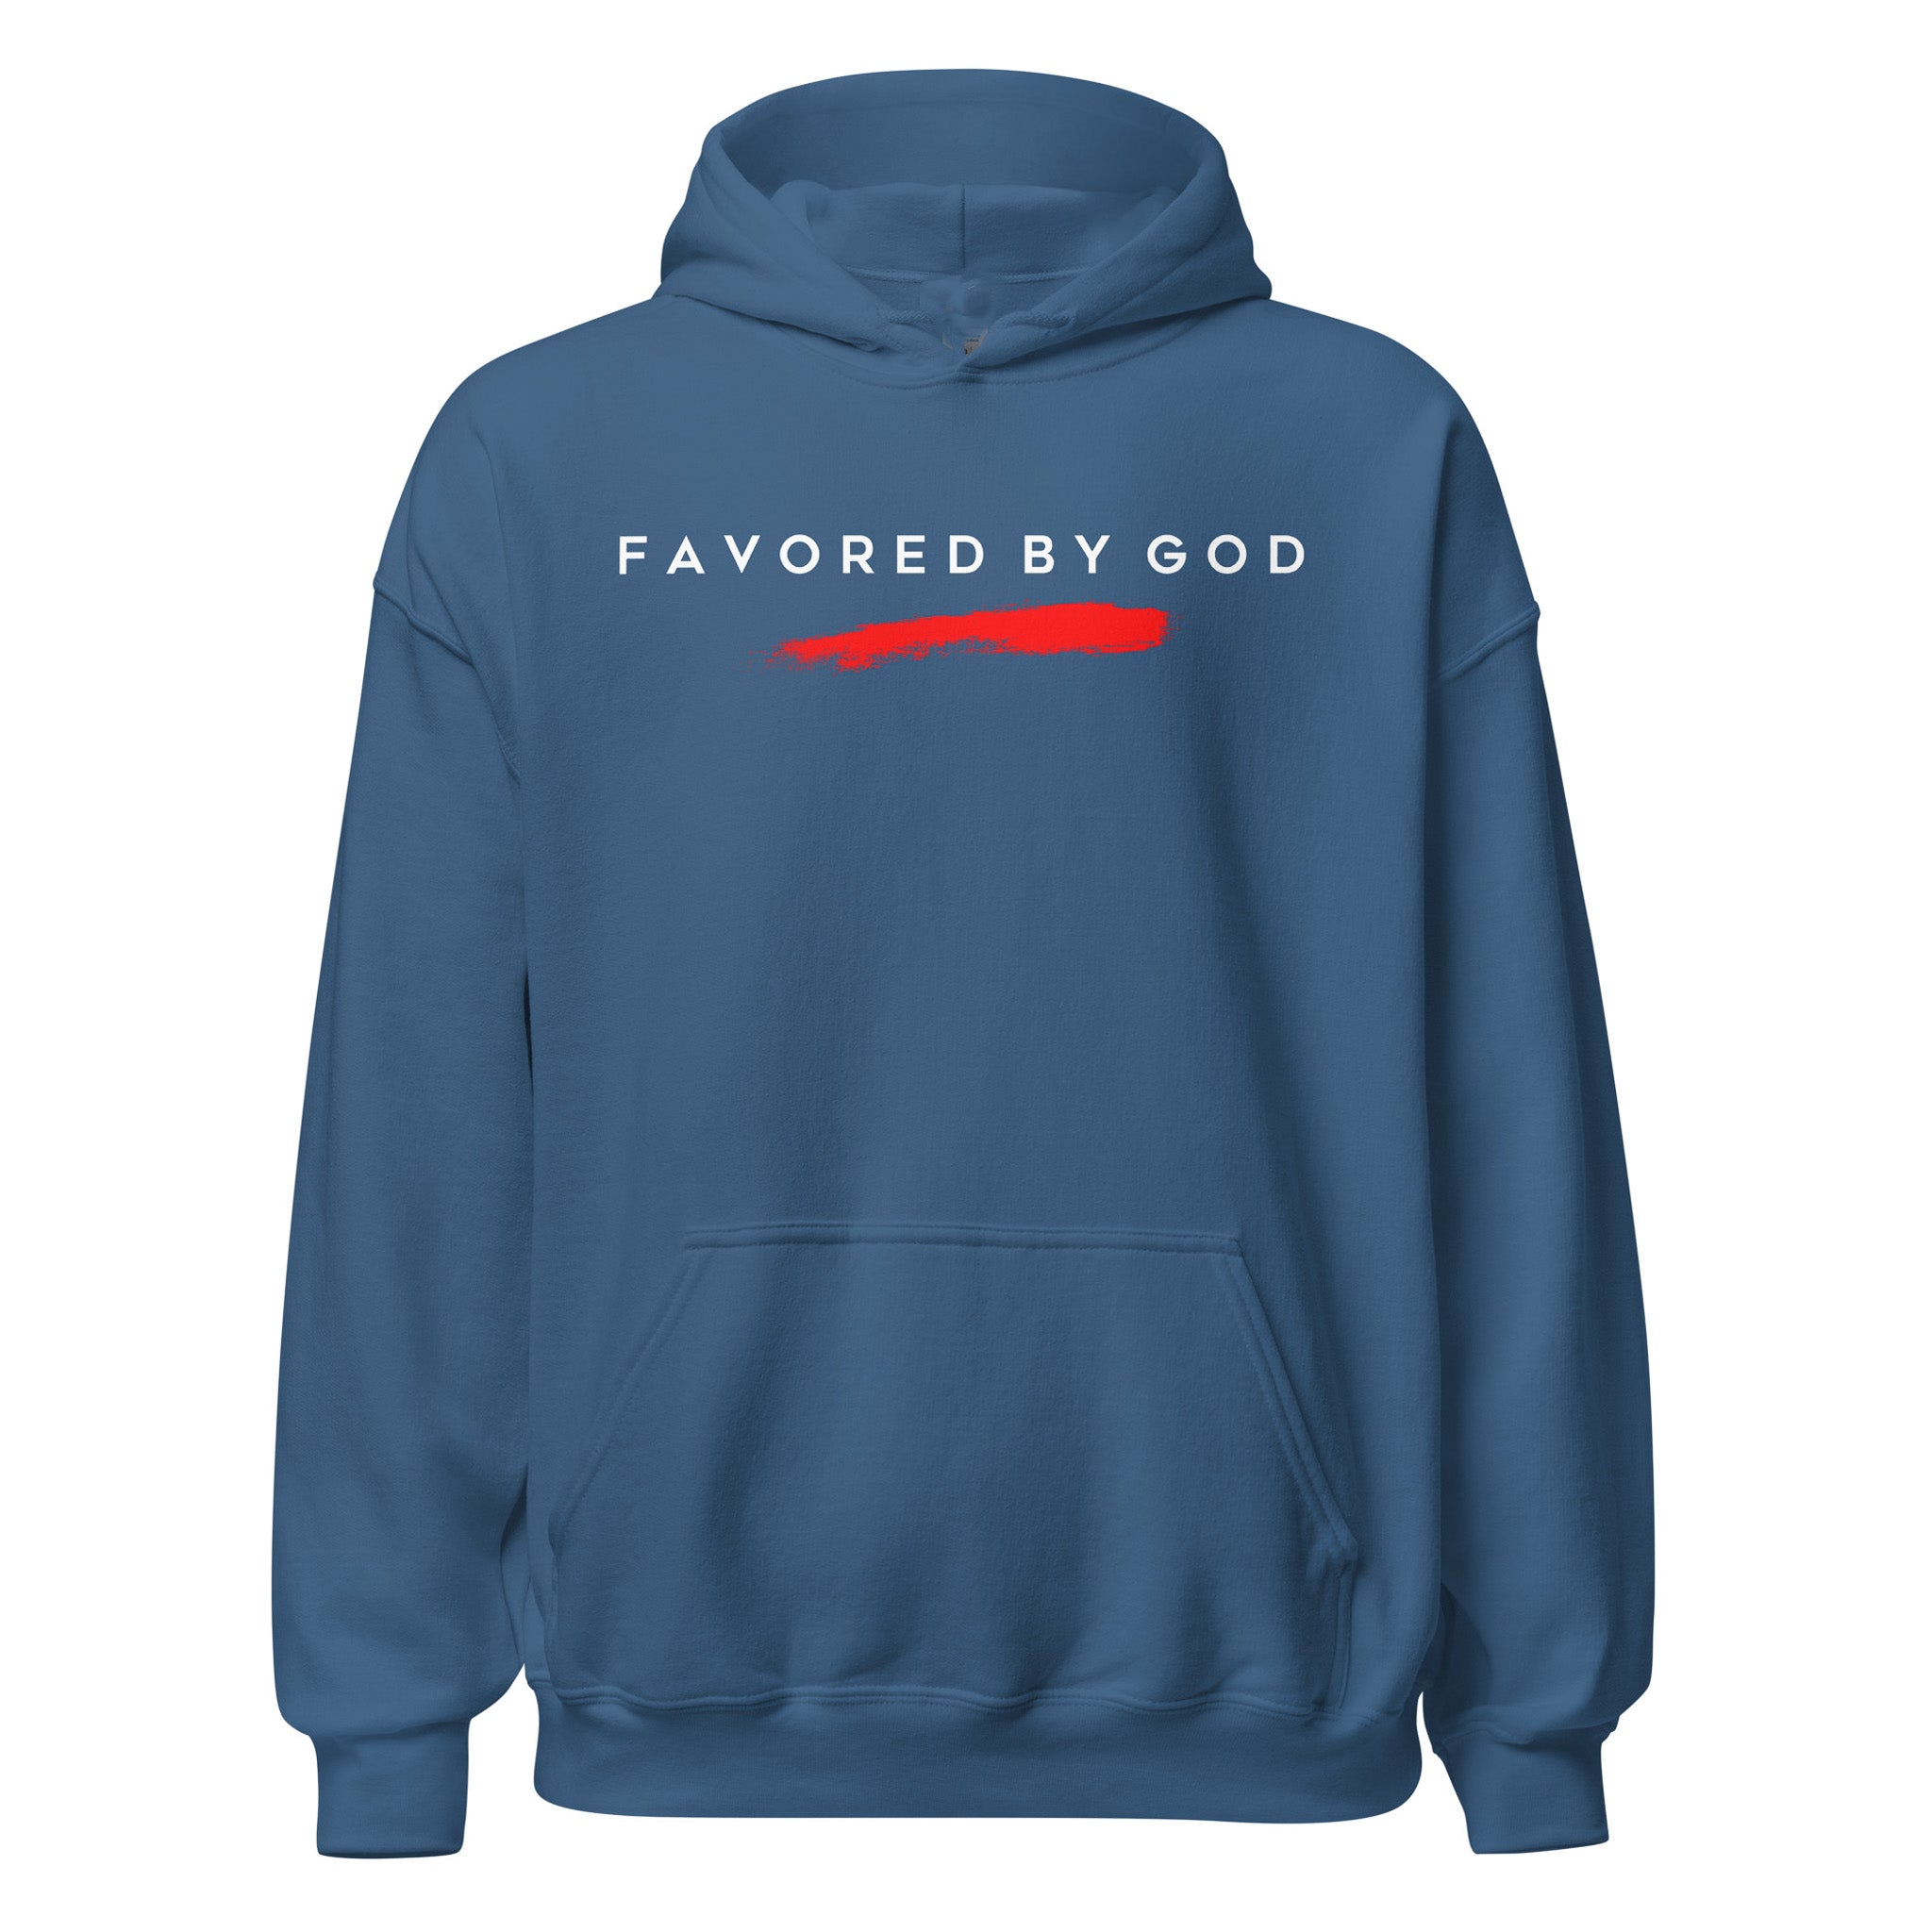 By His Stripes Favored Hoodie